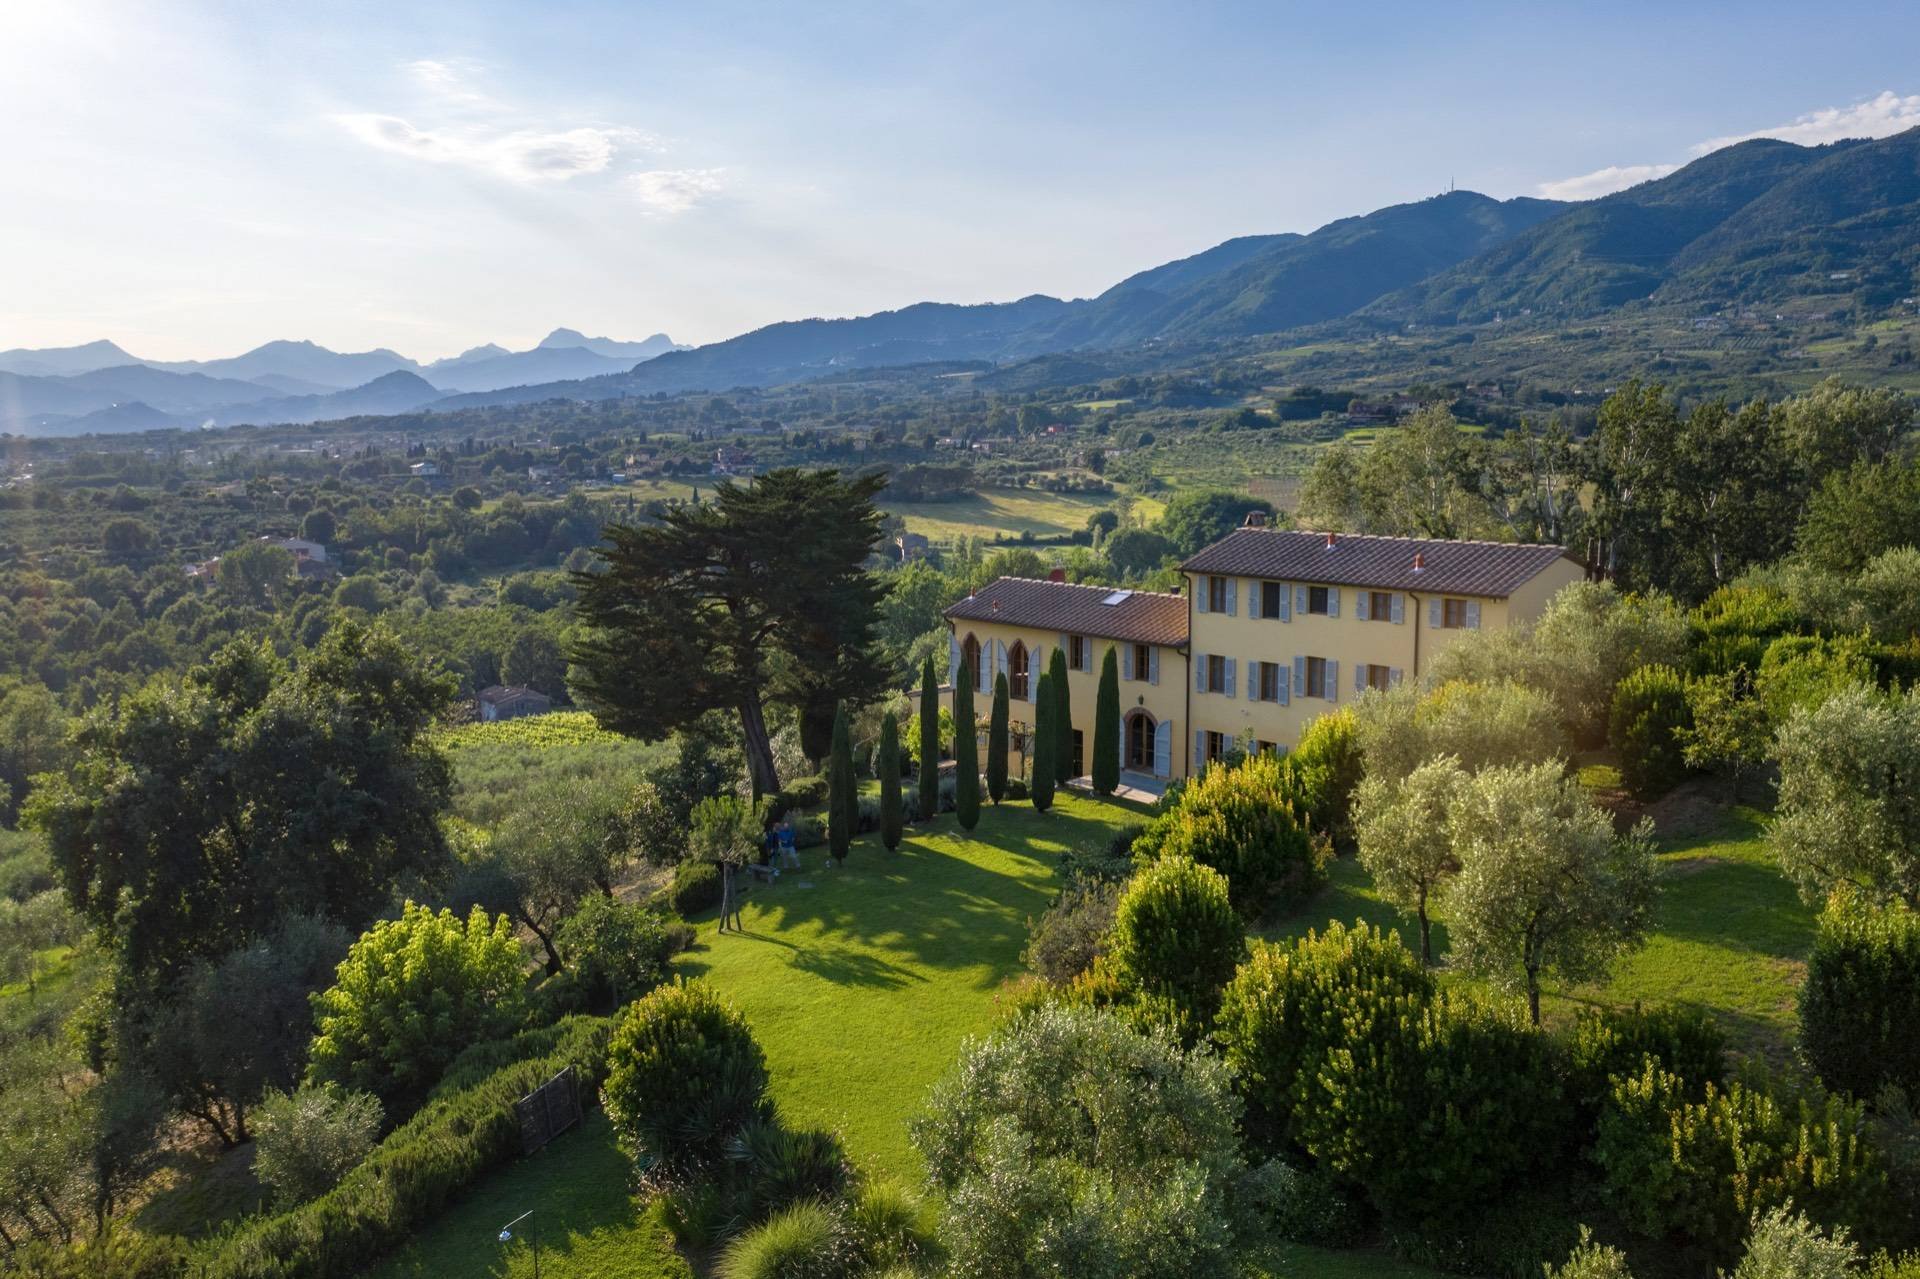 Francis York  Turnkey Italian Villa With Vineyards and Olive Groves Near Lucca 00004.jpg